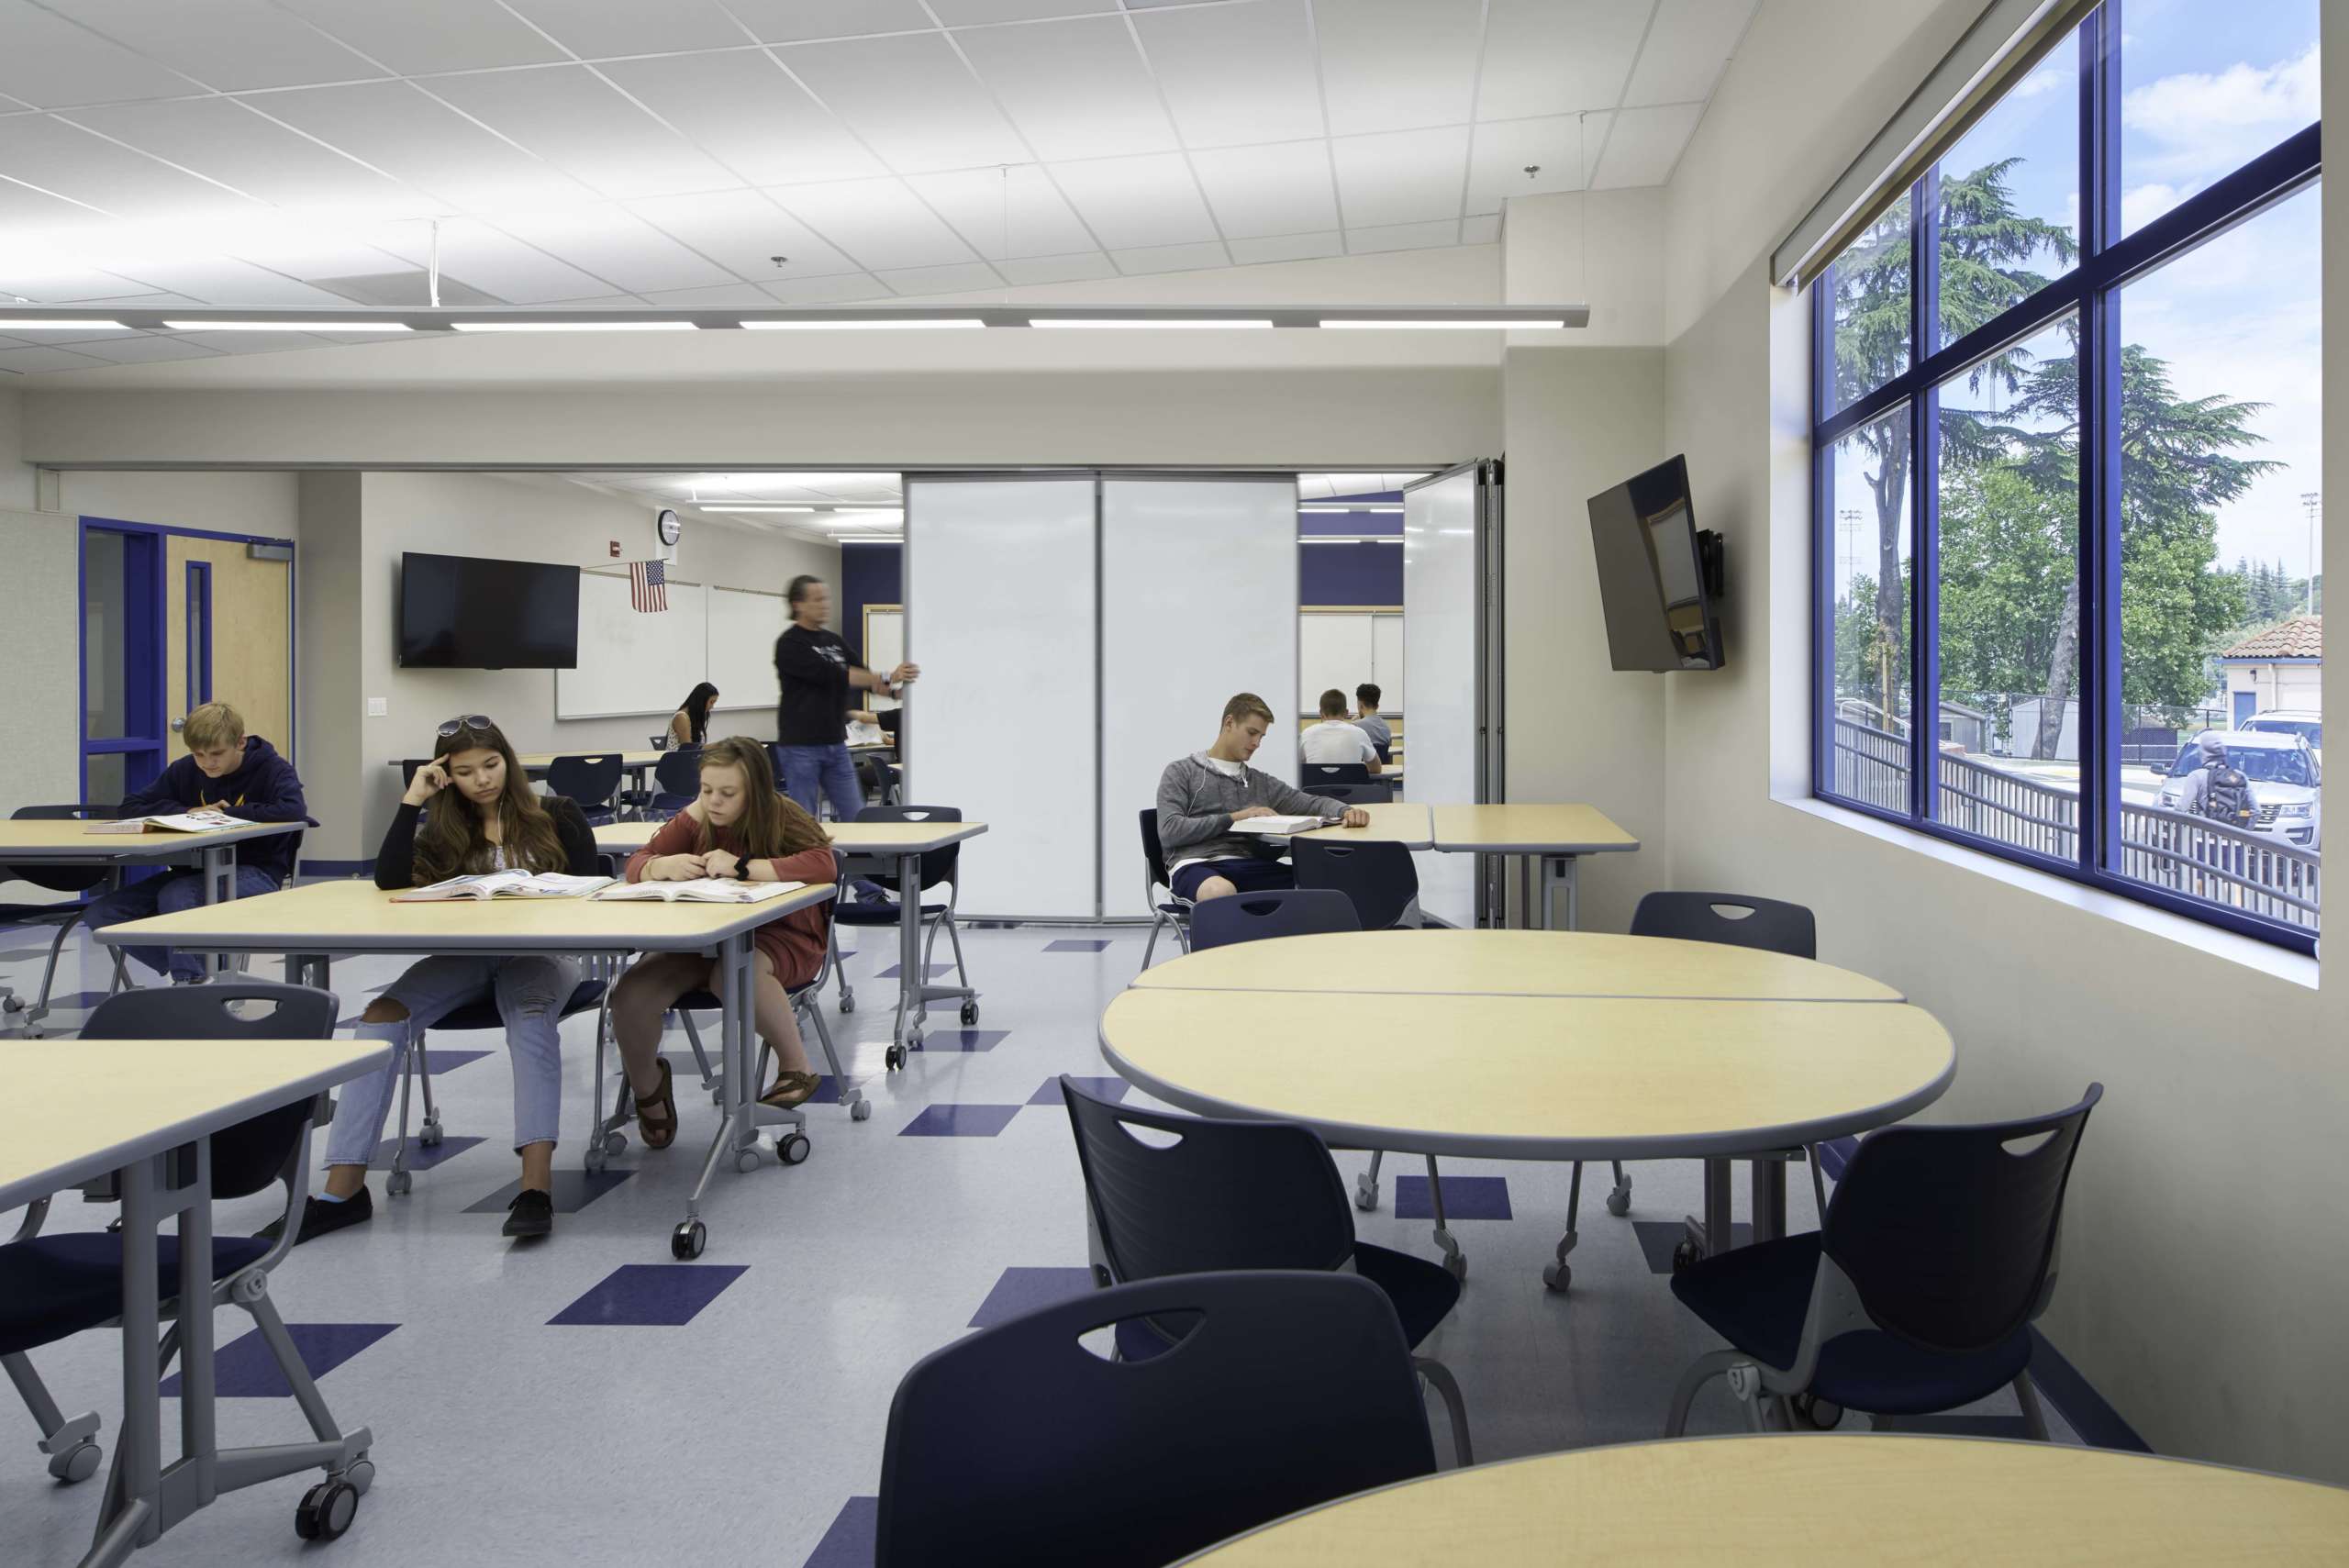 Students studying in studying space at Alhambra High School